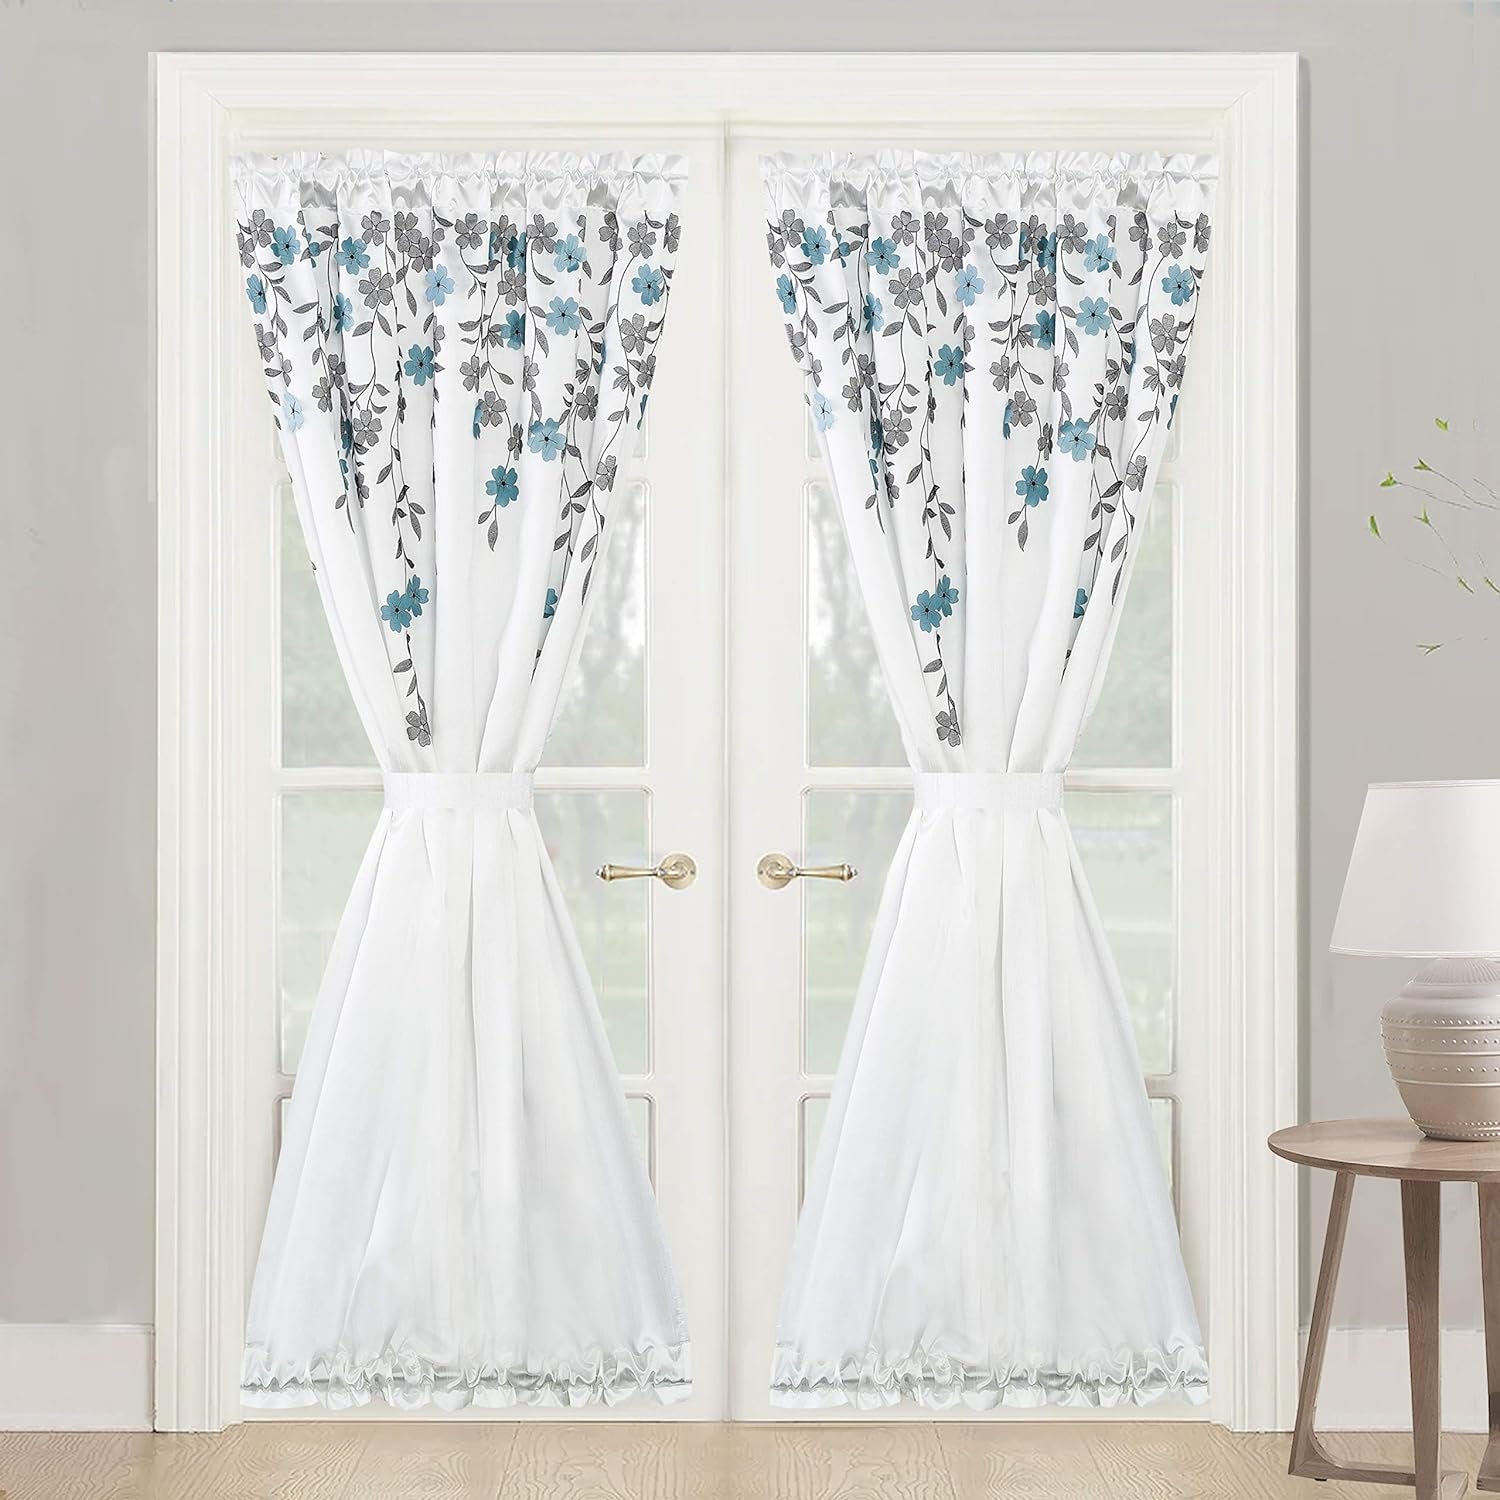 Driftaway Isabella Faux Silk Embroidered Crafted Flower Door Curtain Sidelight Rod Pocket Room Darkening Front Door 1 Panel with Adjustable Tieback 25 Inch by 72 Inch plus 1.5 Inch Header Blue  DriftAway Ivory/Blue 50”X72” 